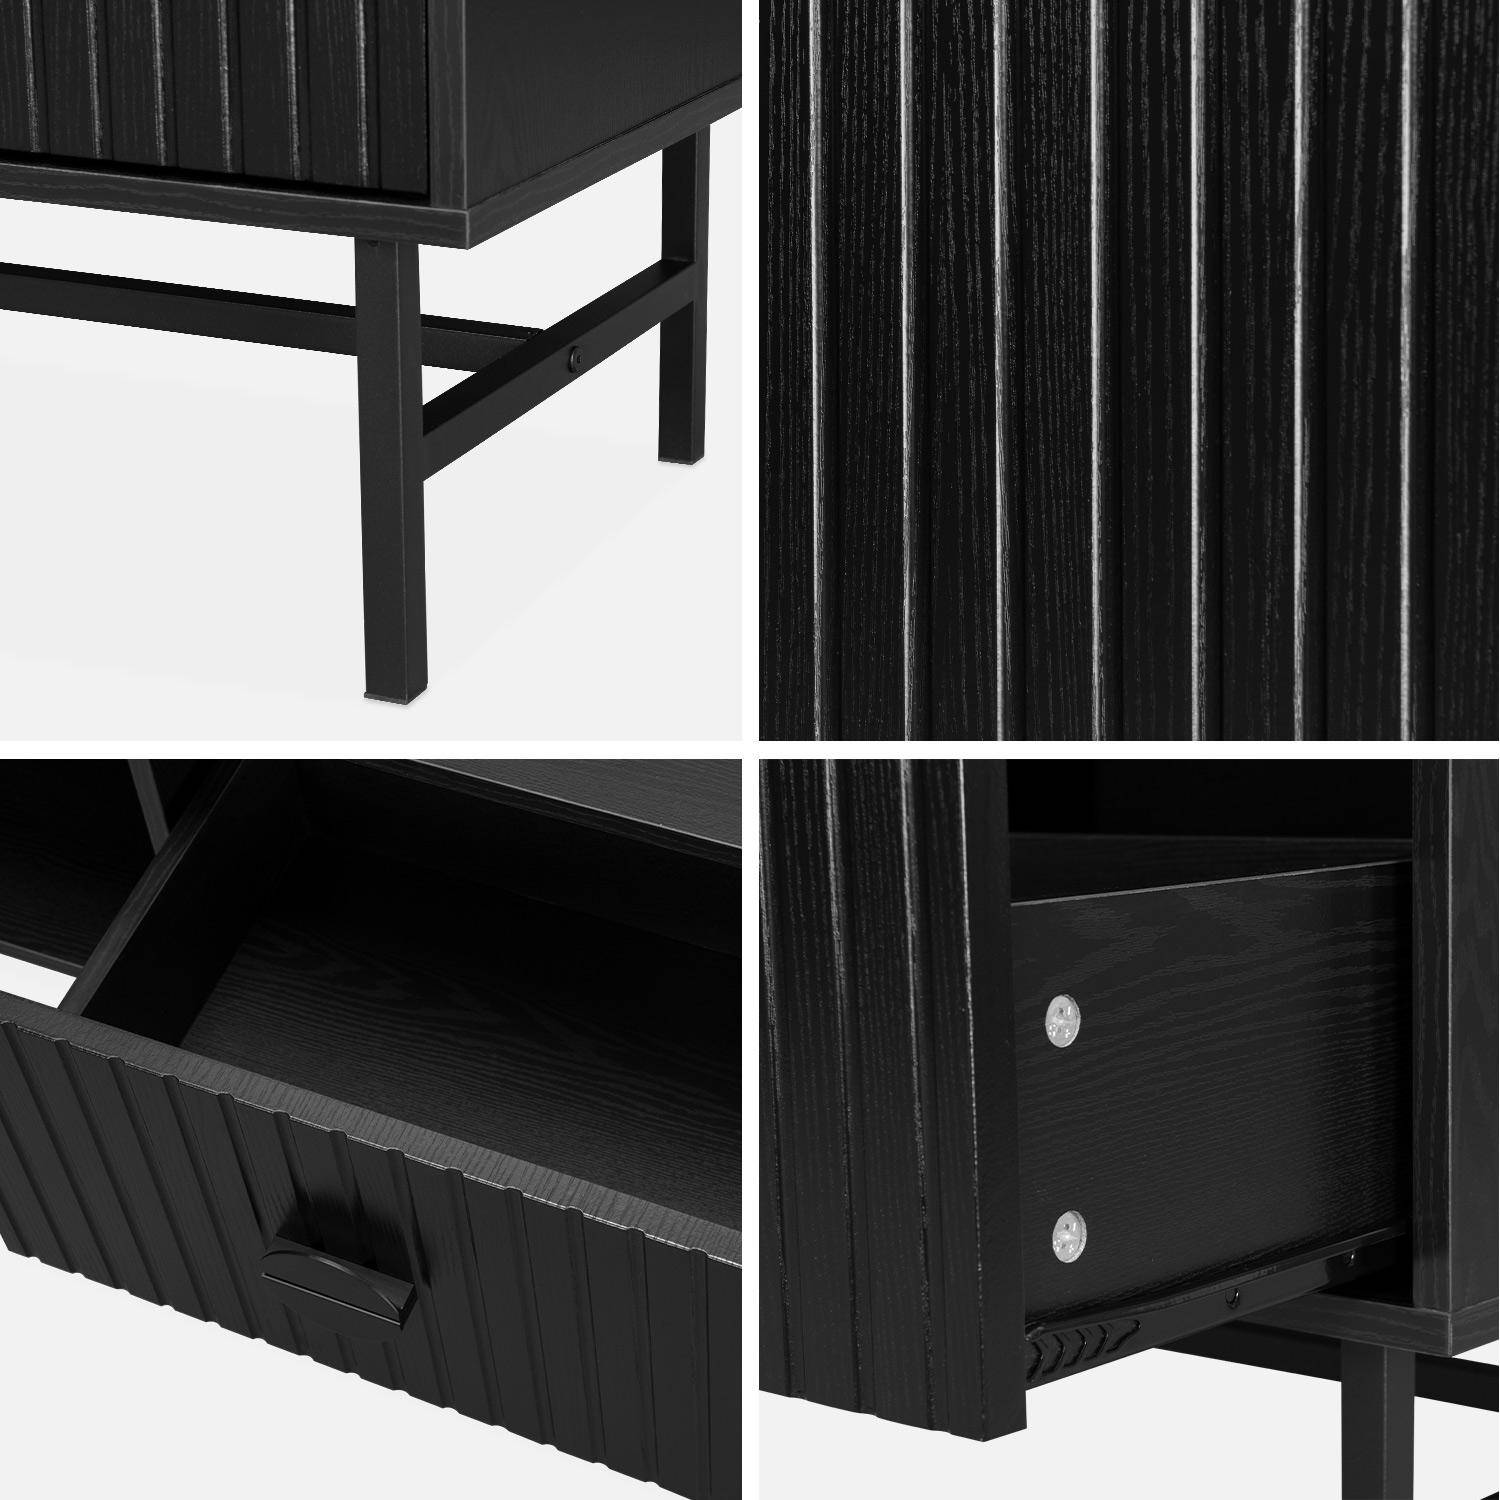 Coffee table with one drawer and one storage nook, ridged effect, industrial style, 100x59x50.2cm - Bazalt - Black,sweeek,Photo8